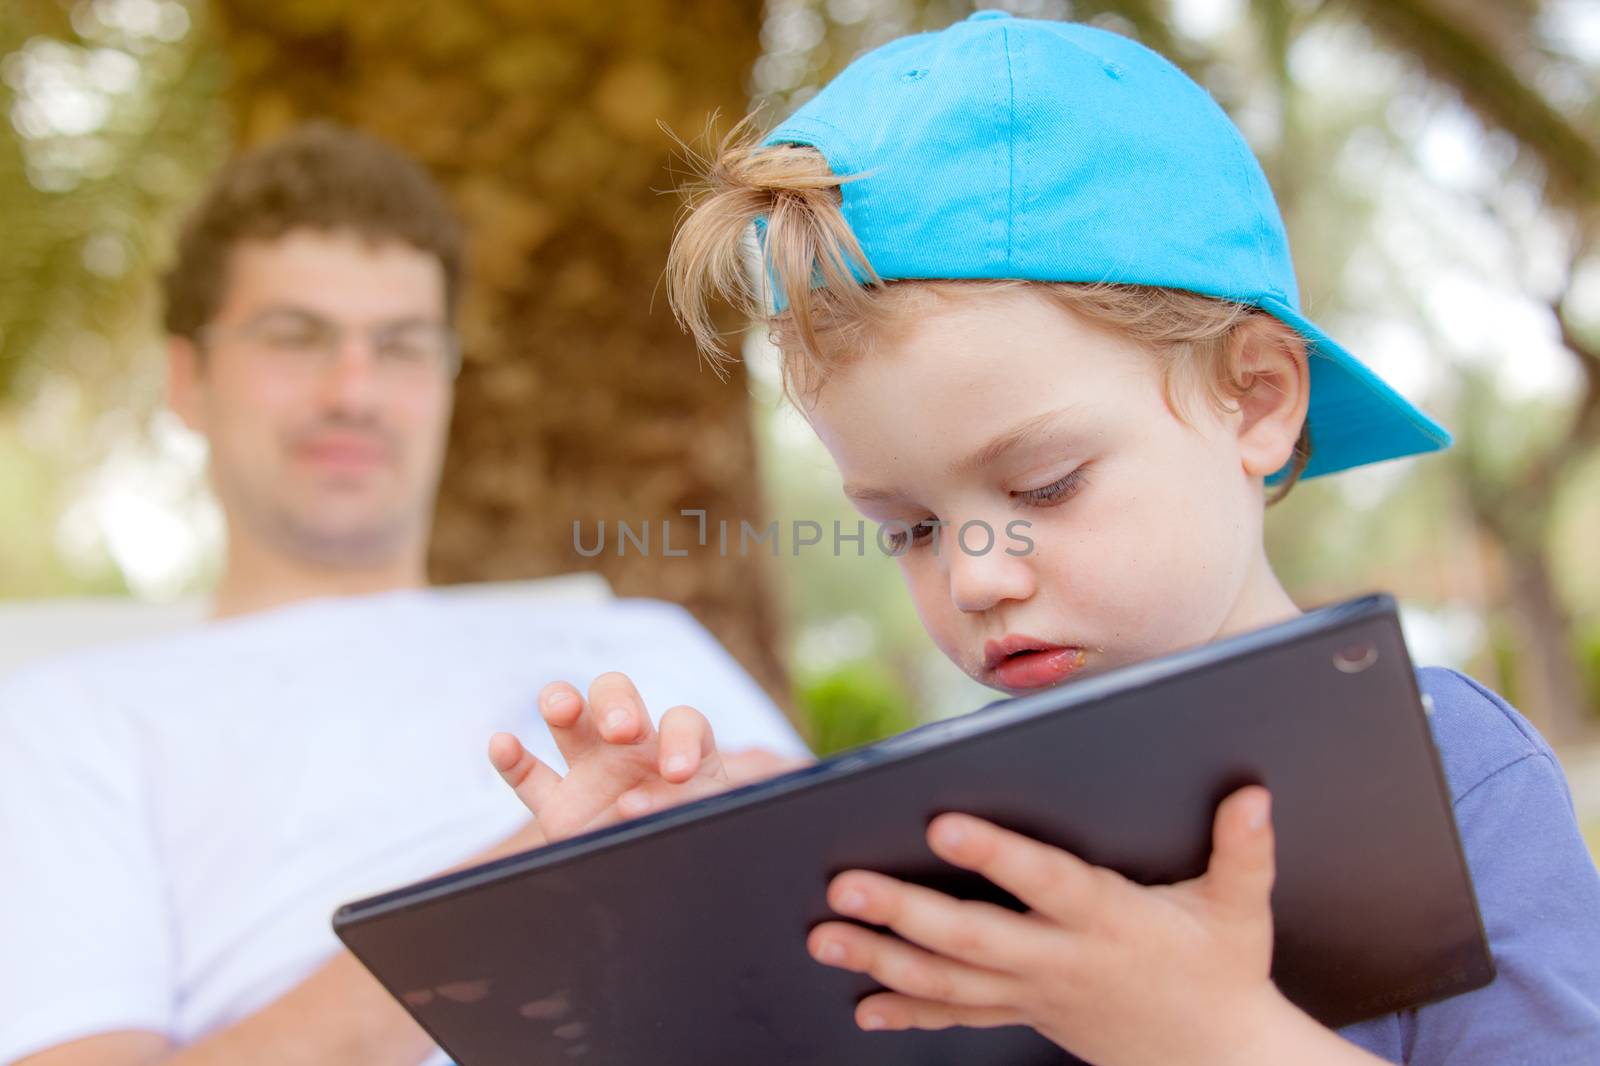 An infant child with food around his mouth is working, playing with tablet outdoors.